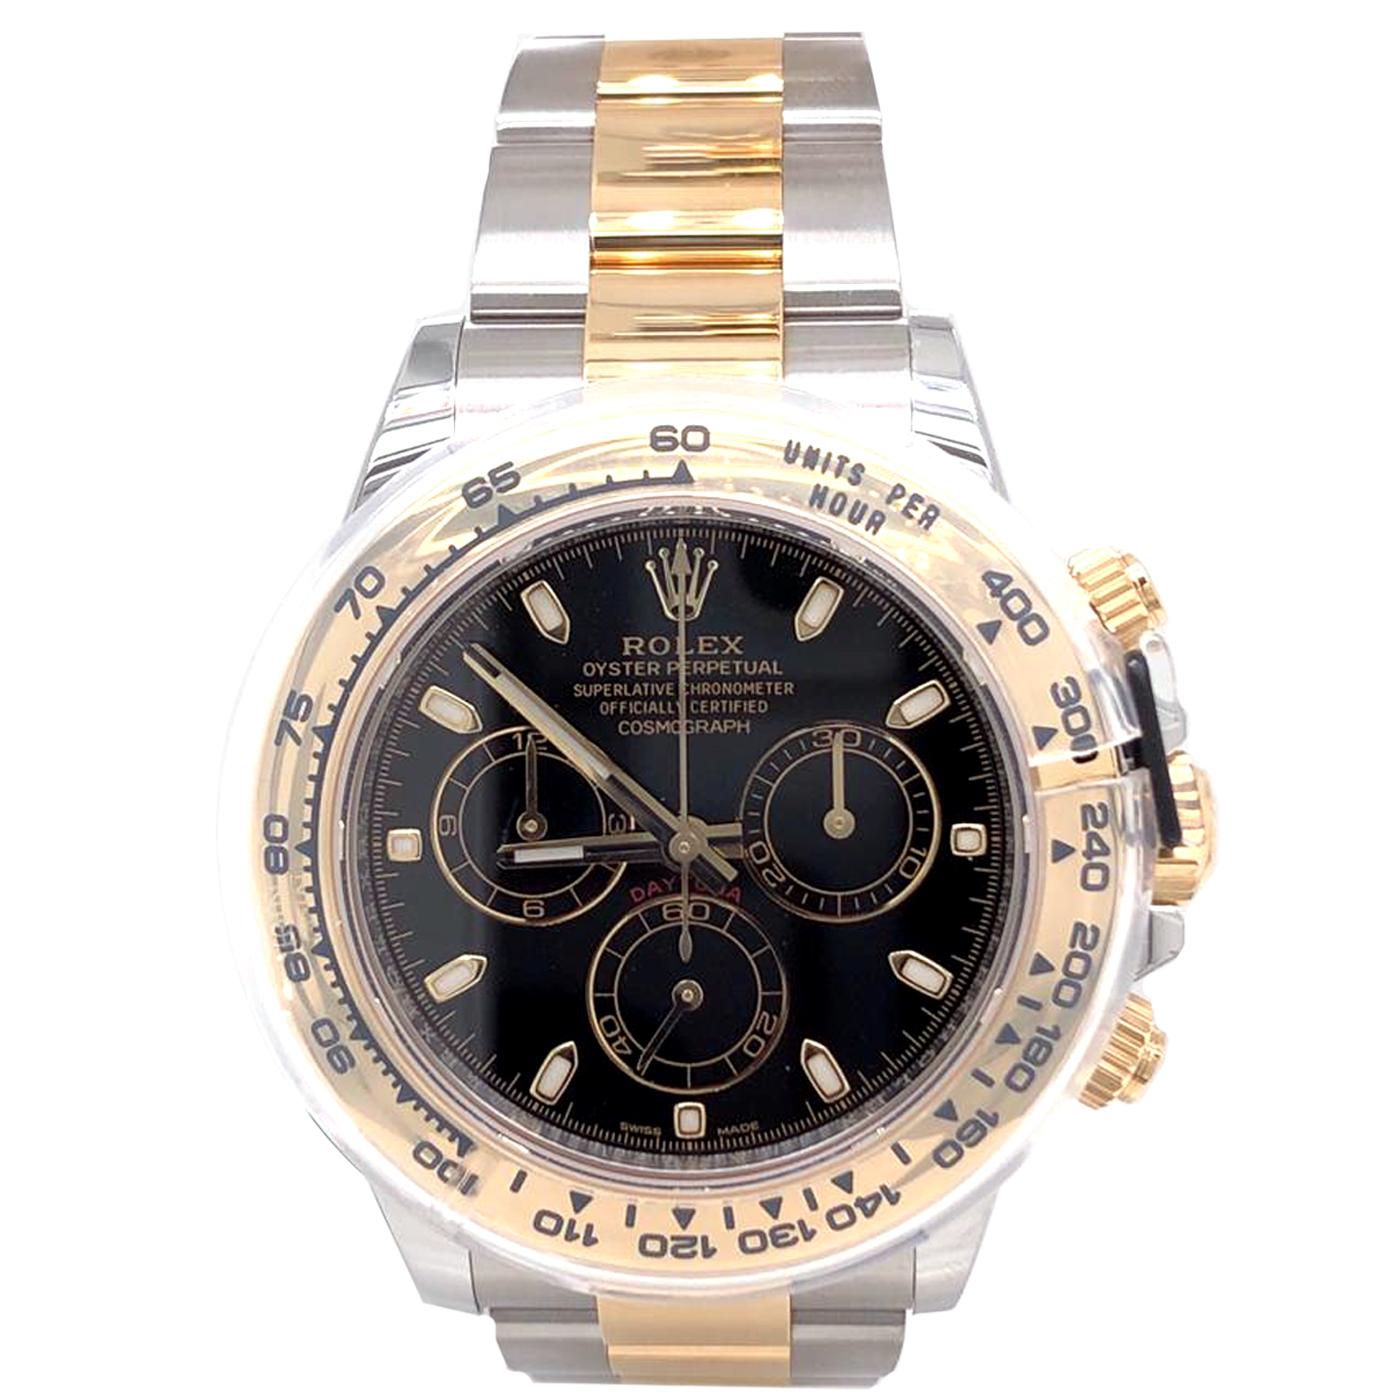 Brand: Rolex
Model: Daytona
Model number: 116503
Movement: Automatic
Case Material: Gold/Steel
Bracelet material: Gold/Steel
Year of production: October 2020 
Scope of delivery: Original box, original papers
Gender: Men's watch/Unisex
Location: